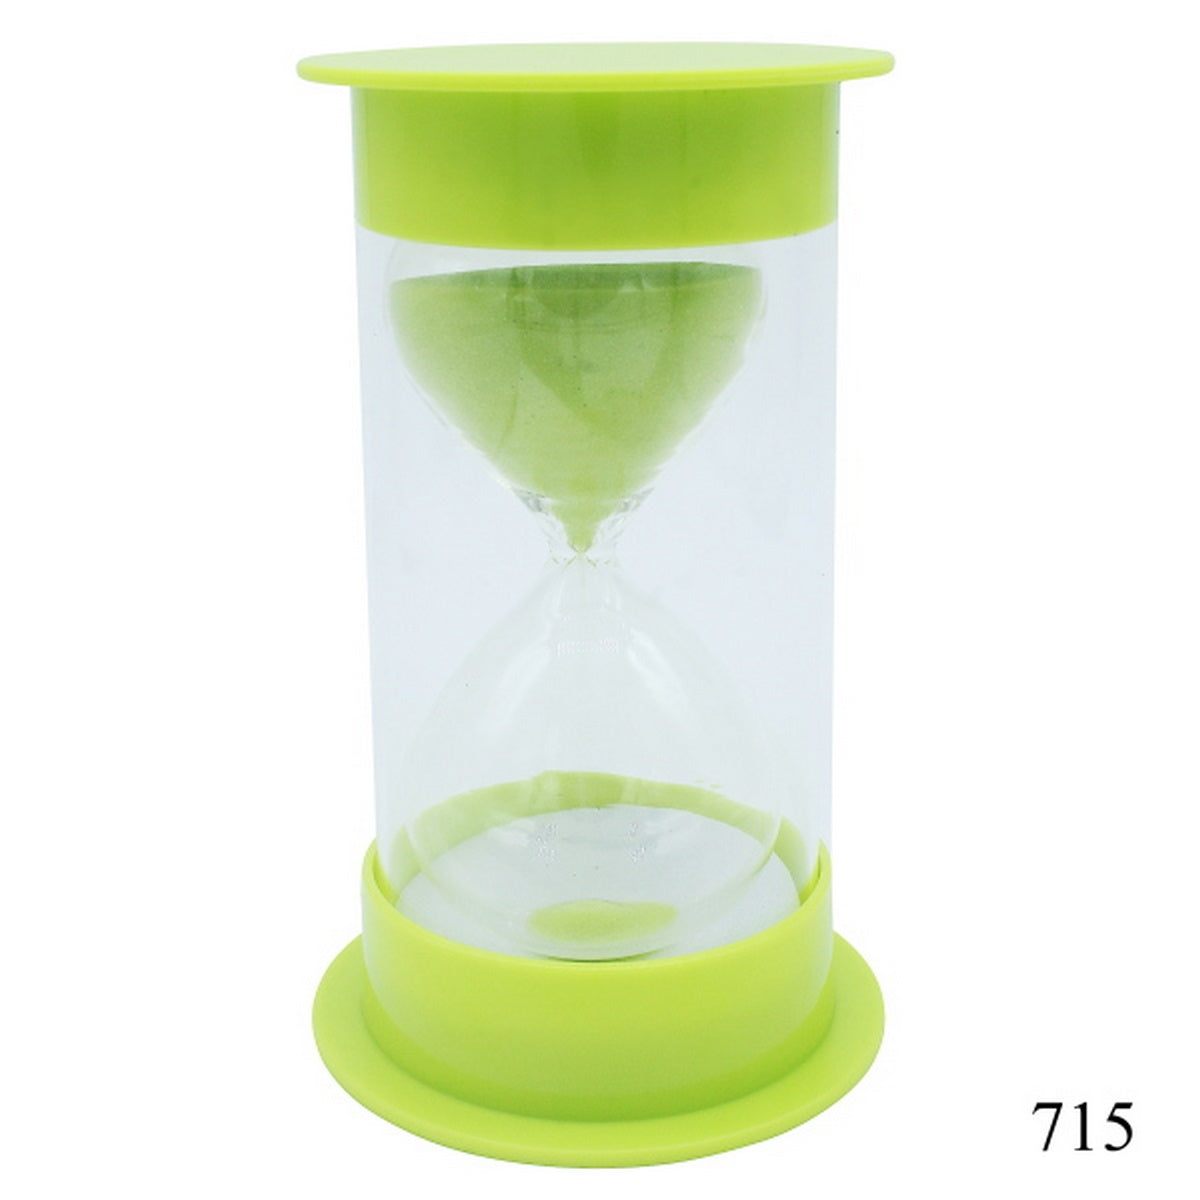 jags-mumbai Sand & Clock Timers Sand Timer Plastic Round Double Glass Minute